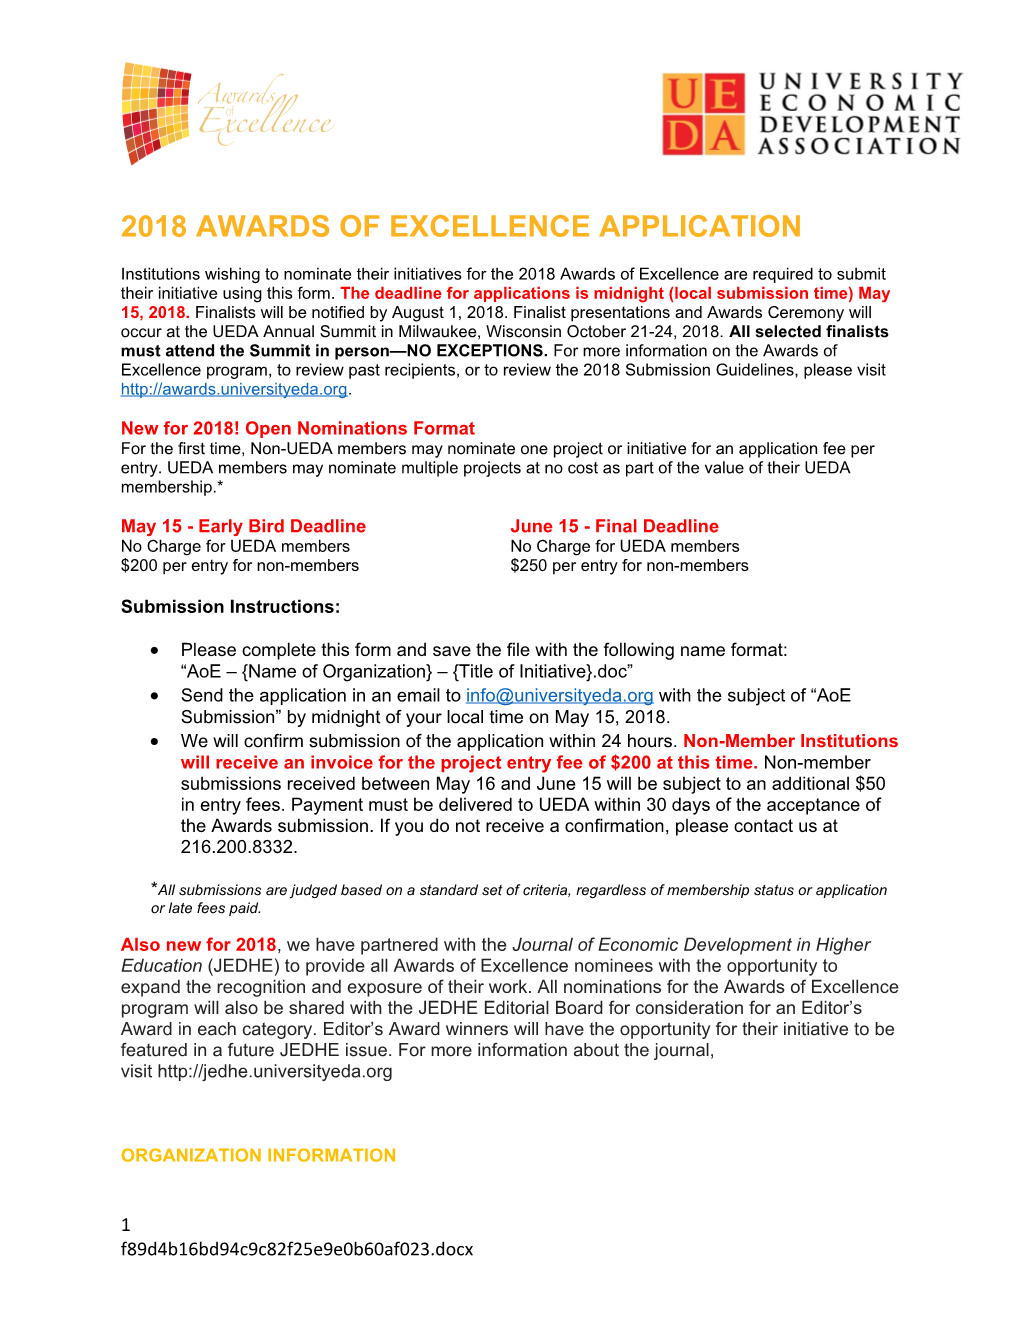 2018 Awards of Excellence Application